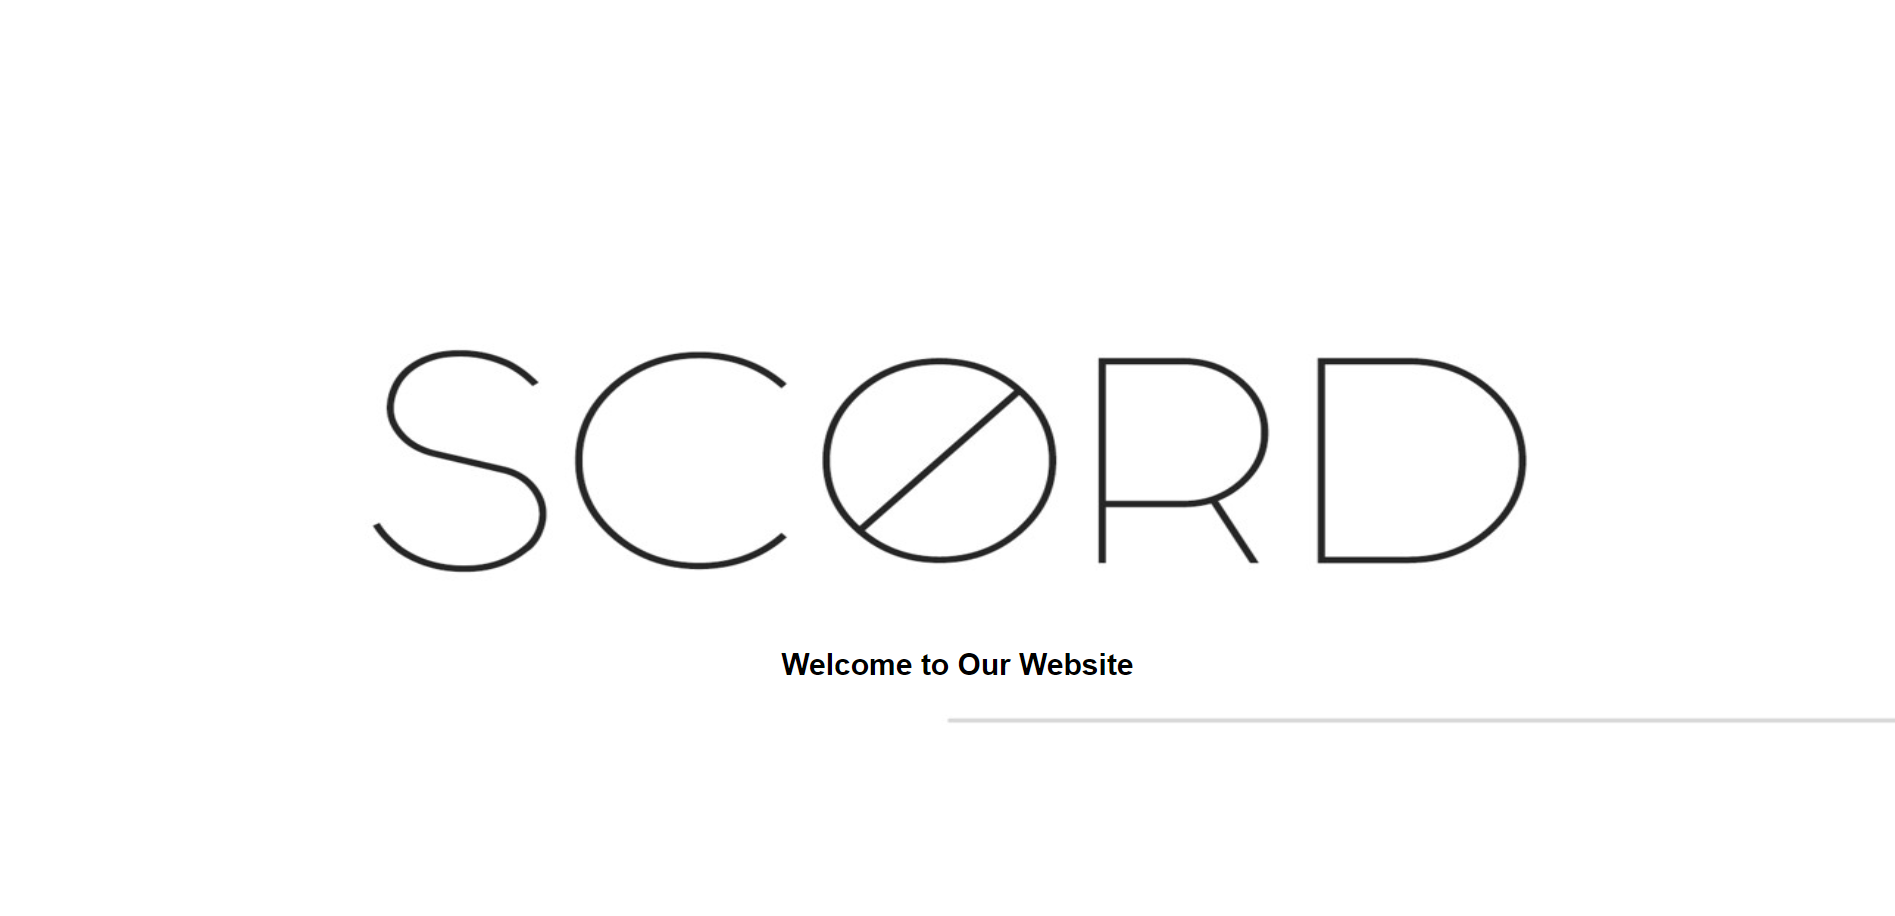 The Welcome/Home Section of the Website